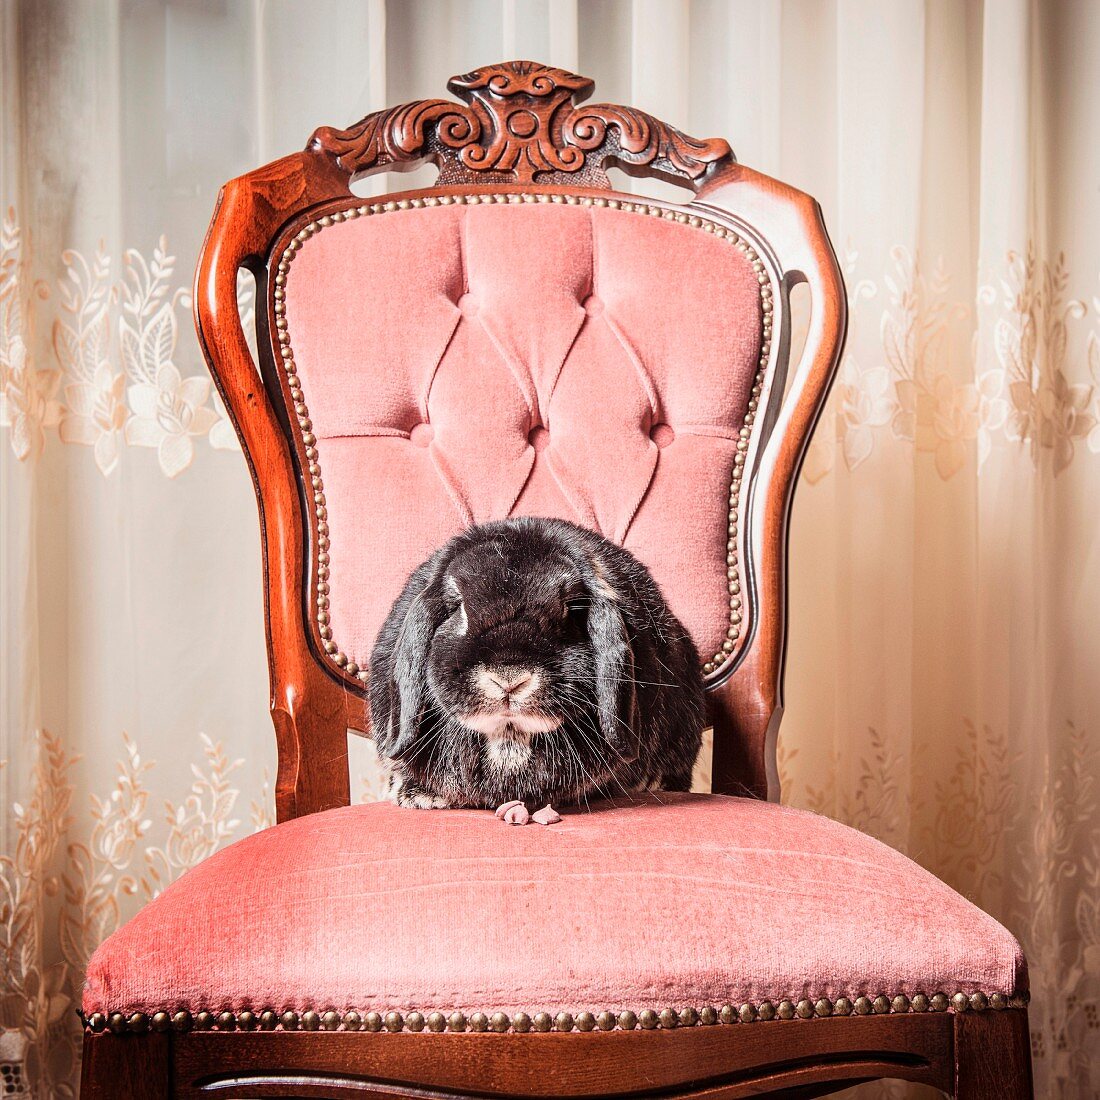 A rabbit on an antique padded chair